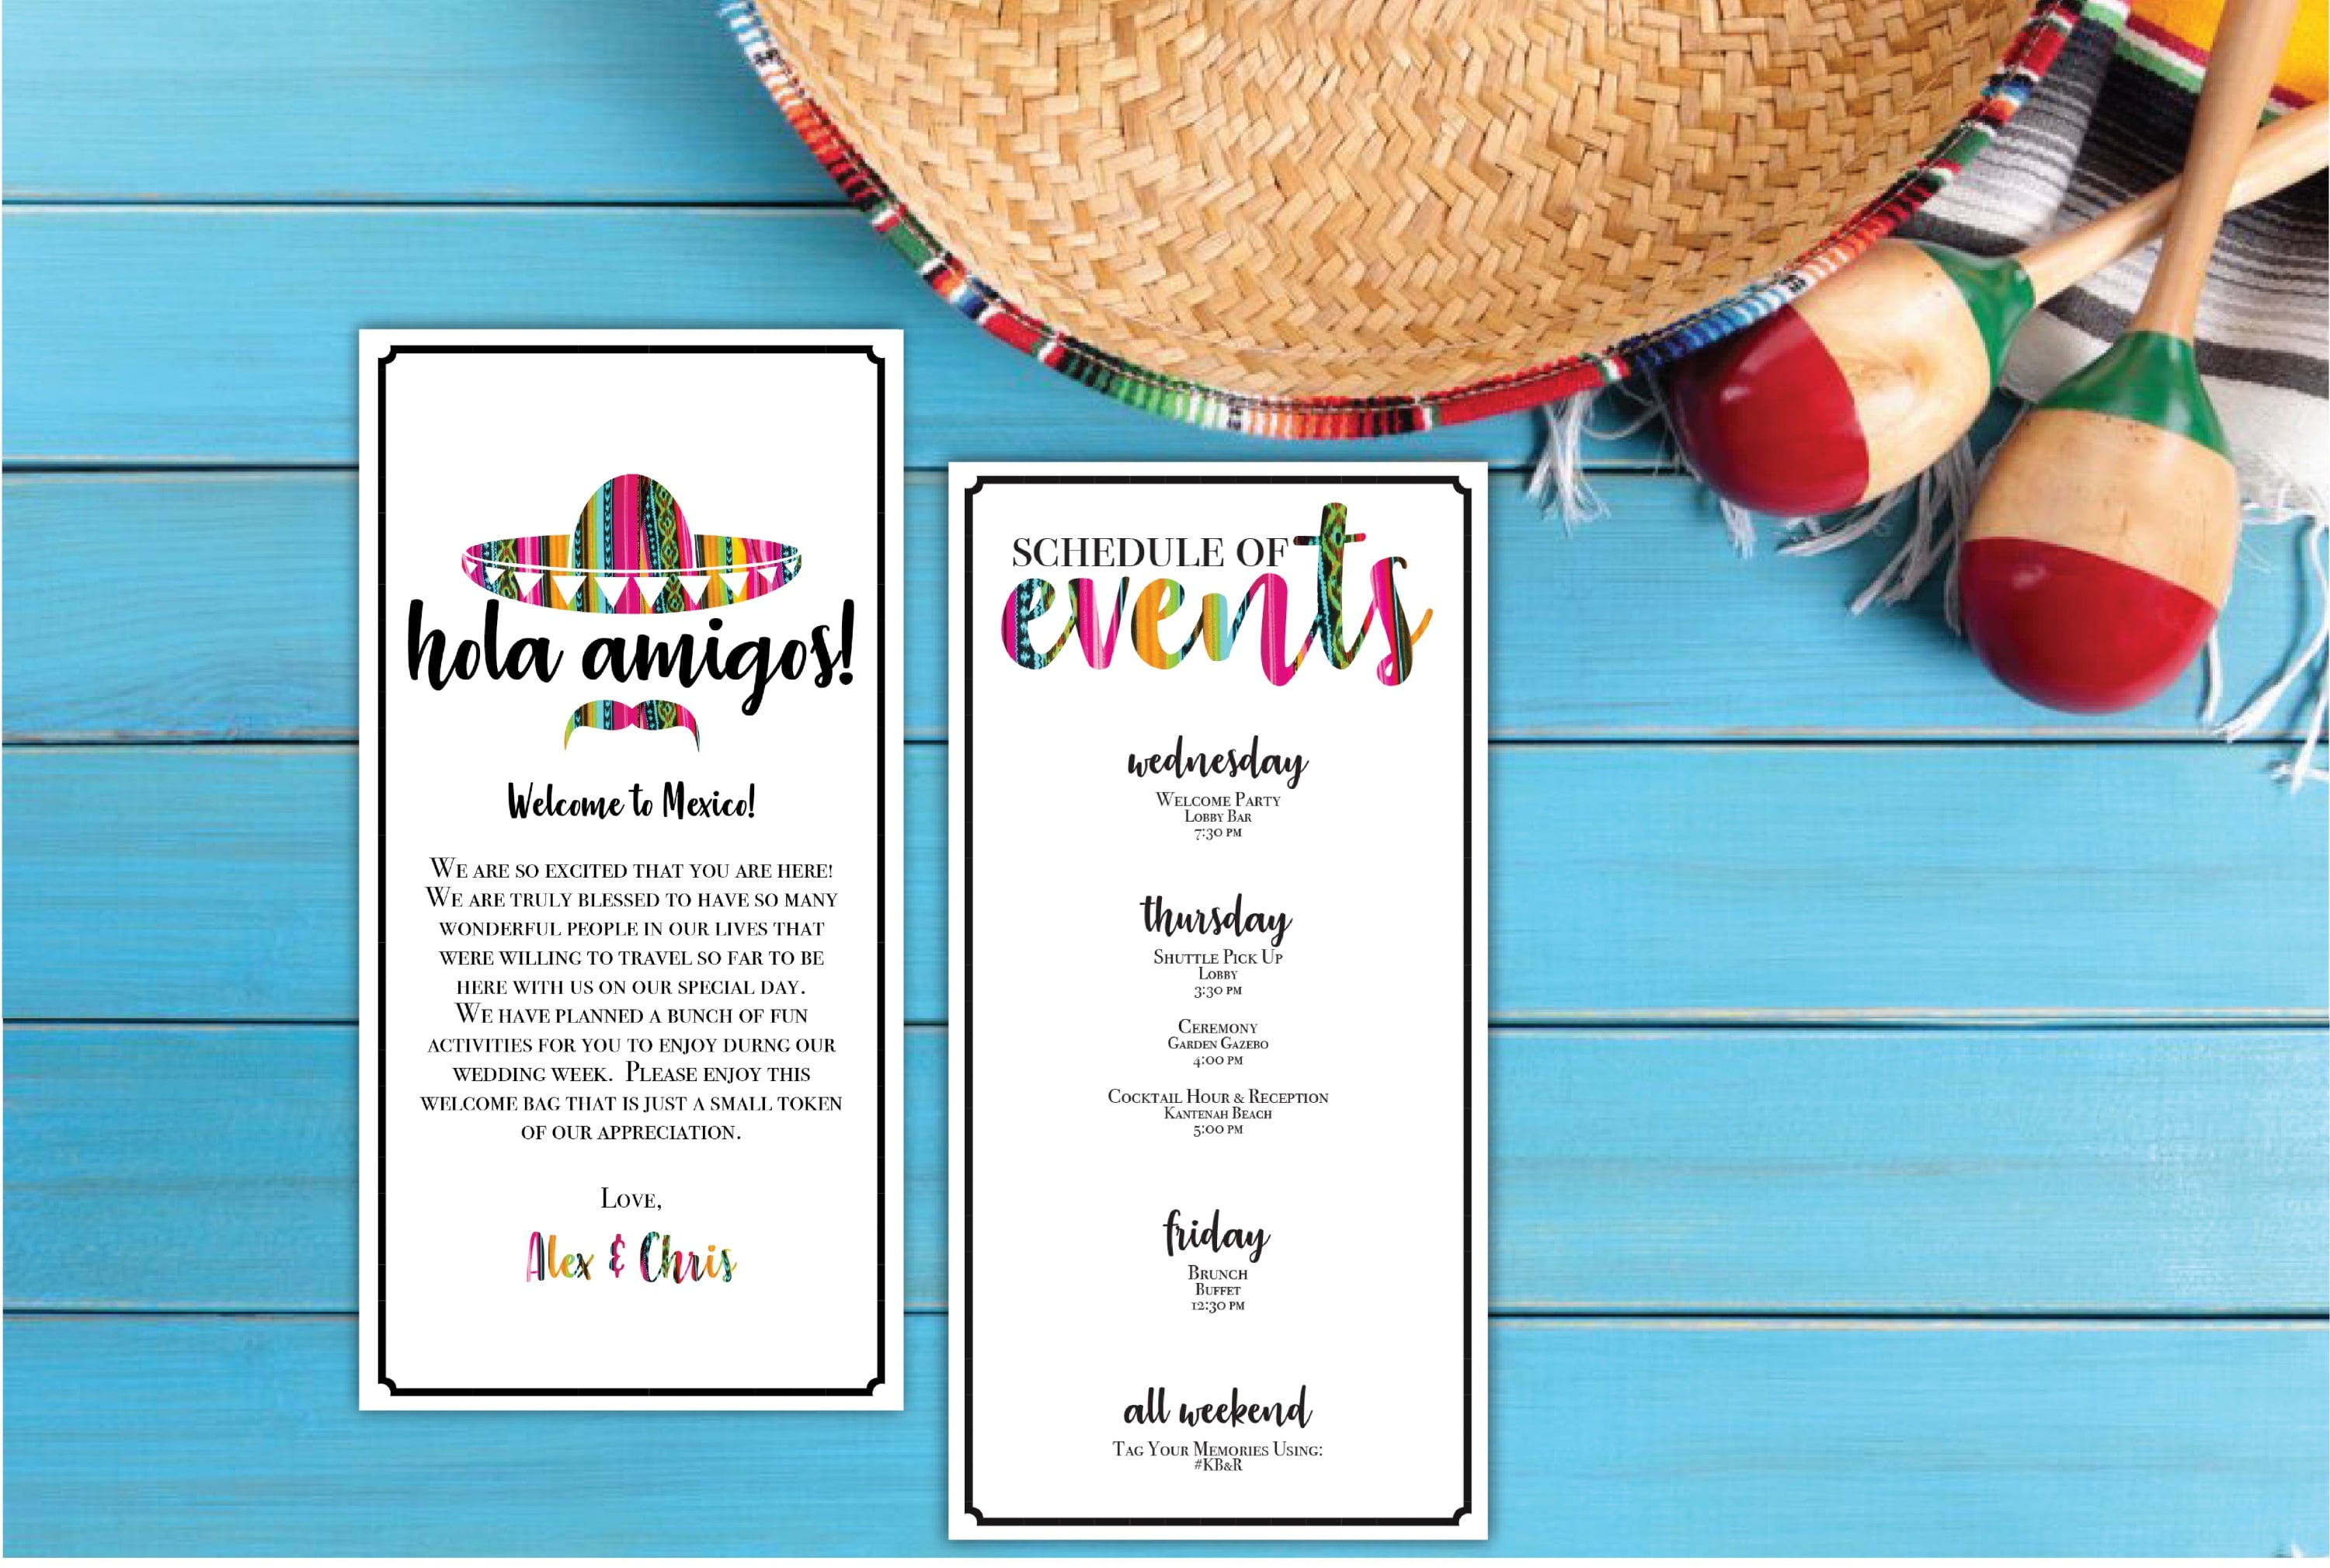 Mexico Destination Wedding Welcome Letter & Itinerary